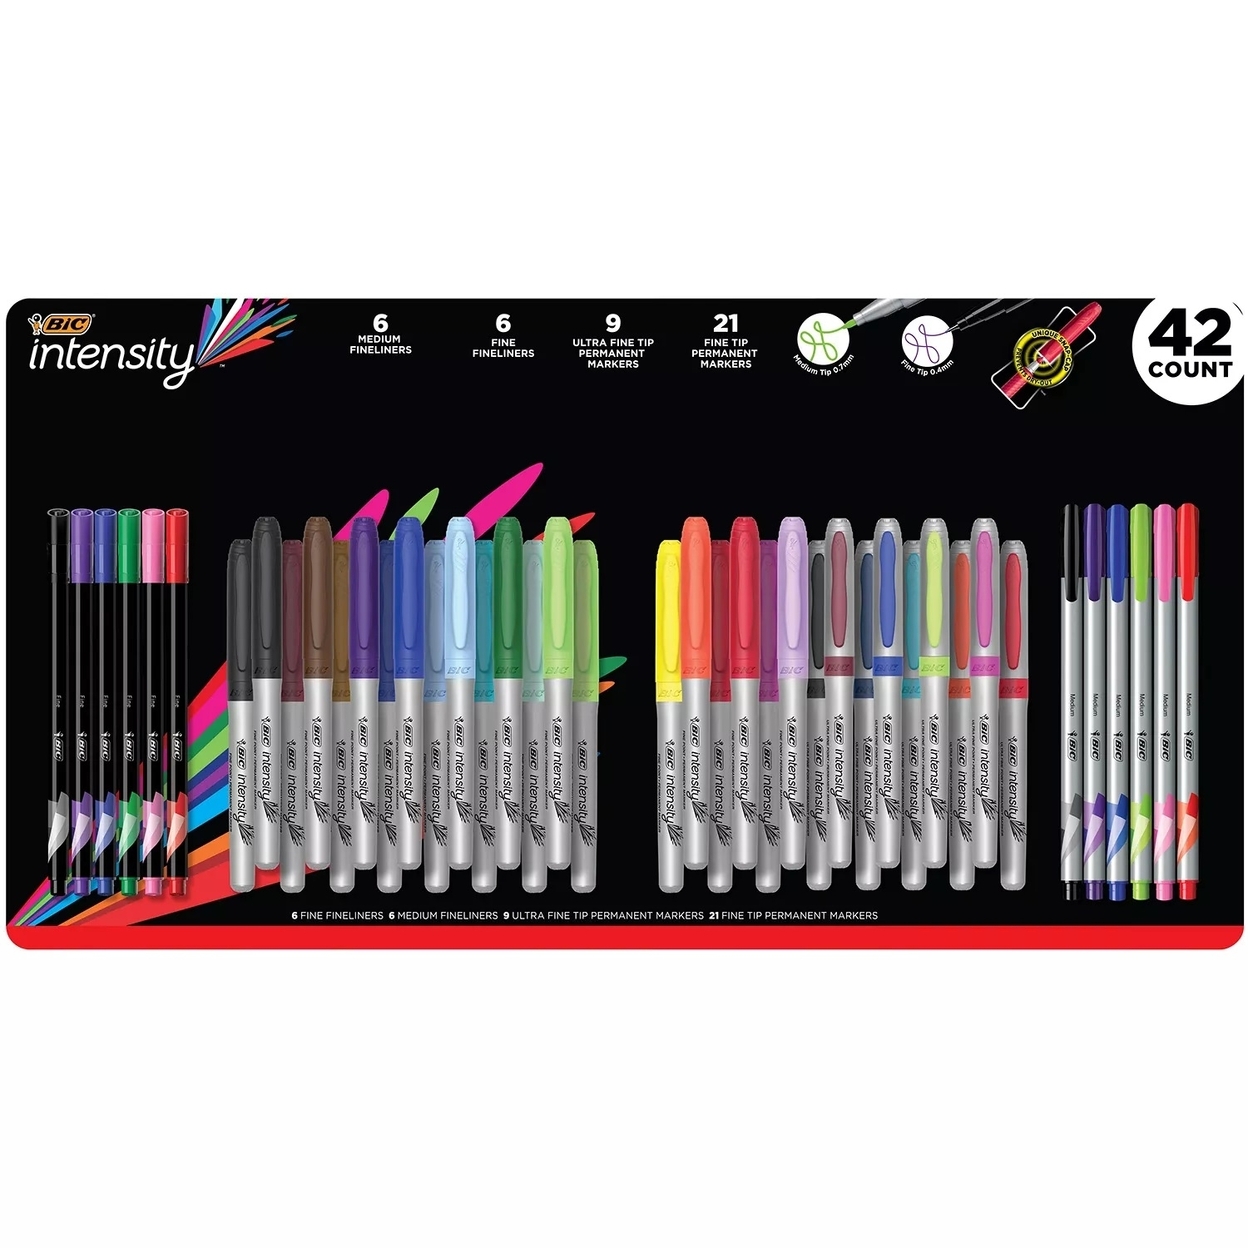 BIC Intensity Permanent Marker & Fineliner Kit, Assorted Colors, 42 Count